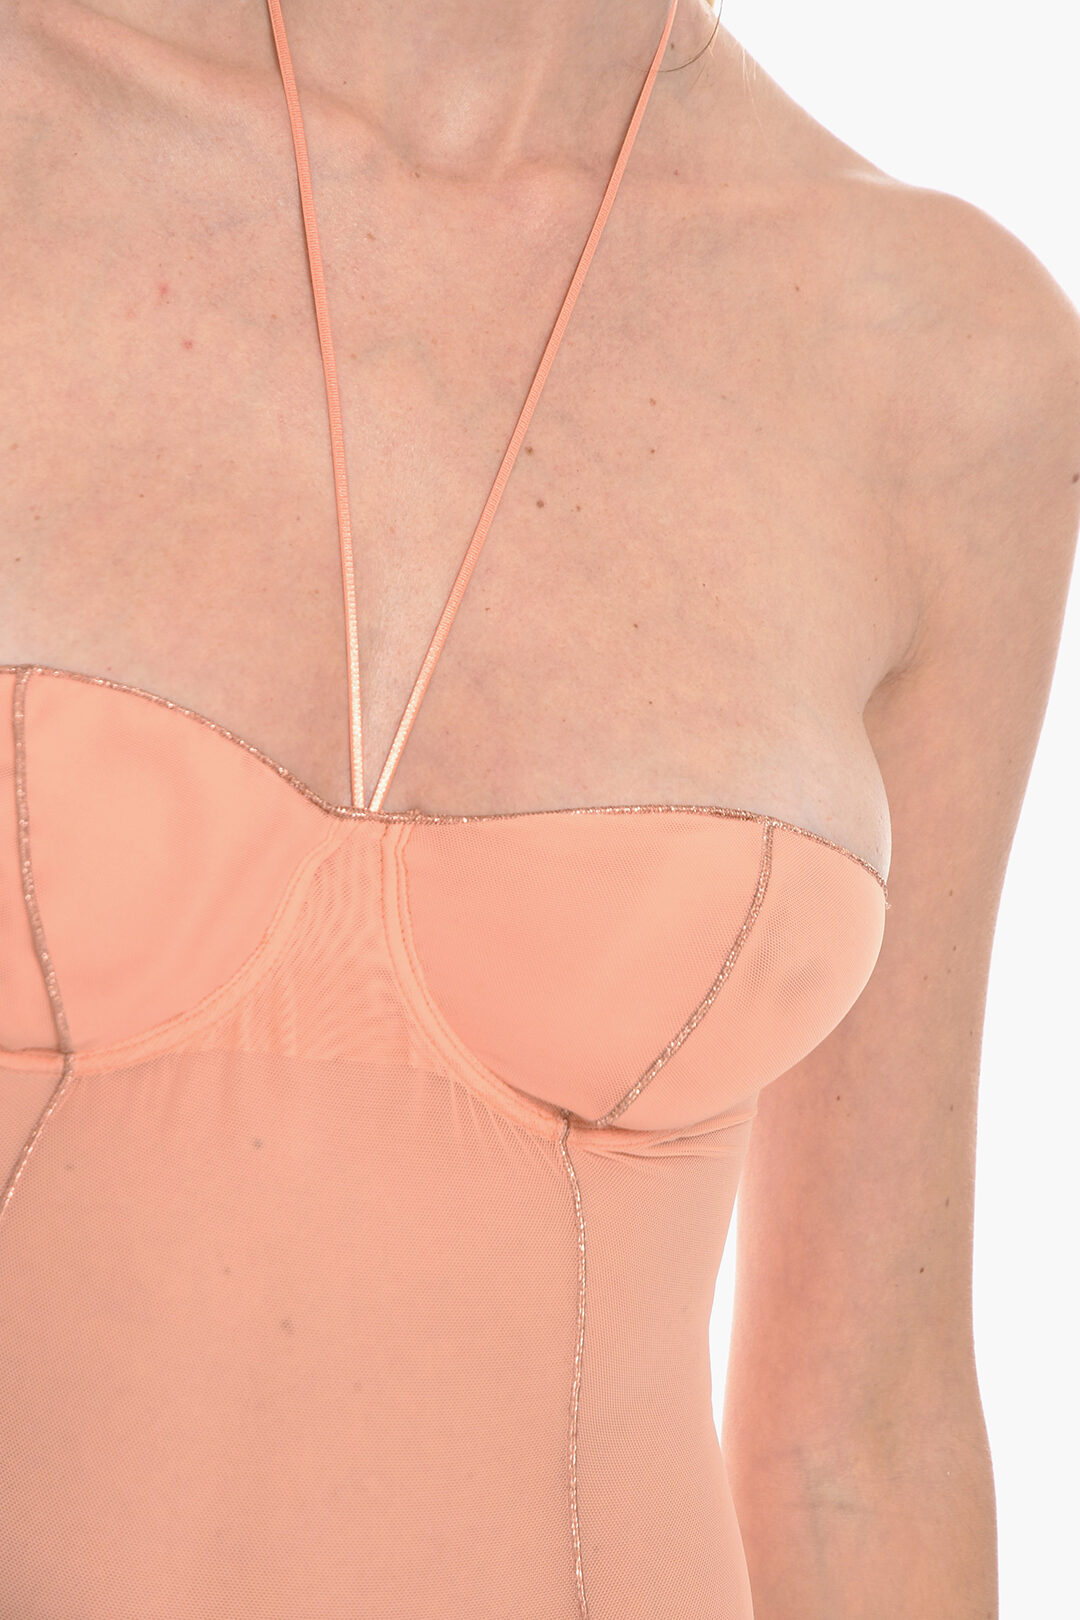 Transparent Bodysuit with Underwire and Glitter Details